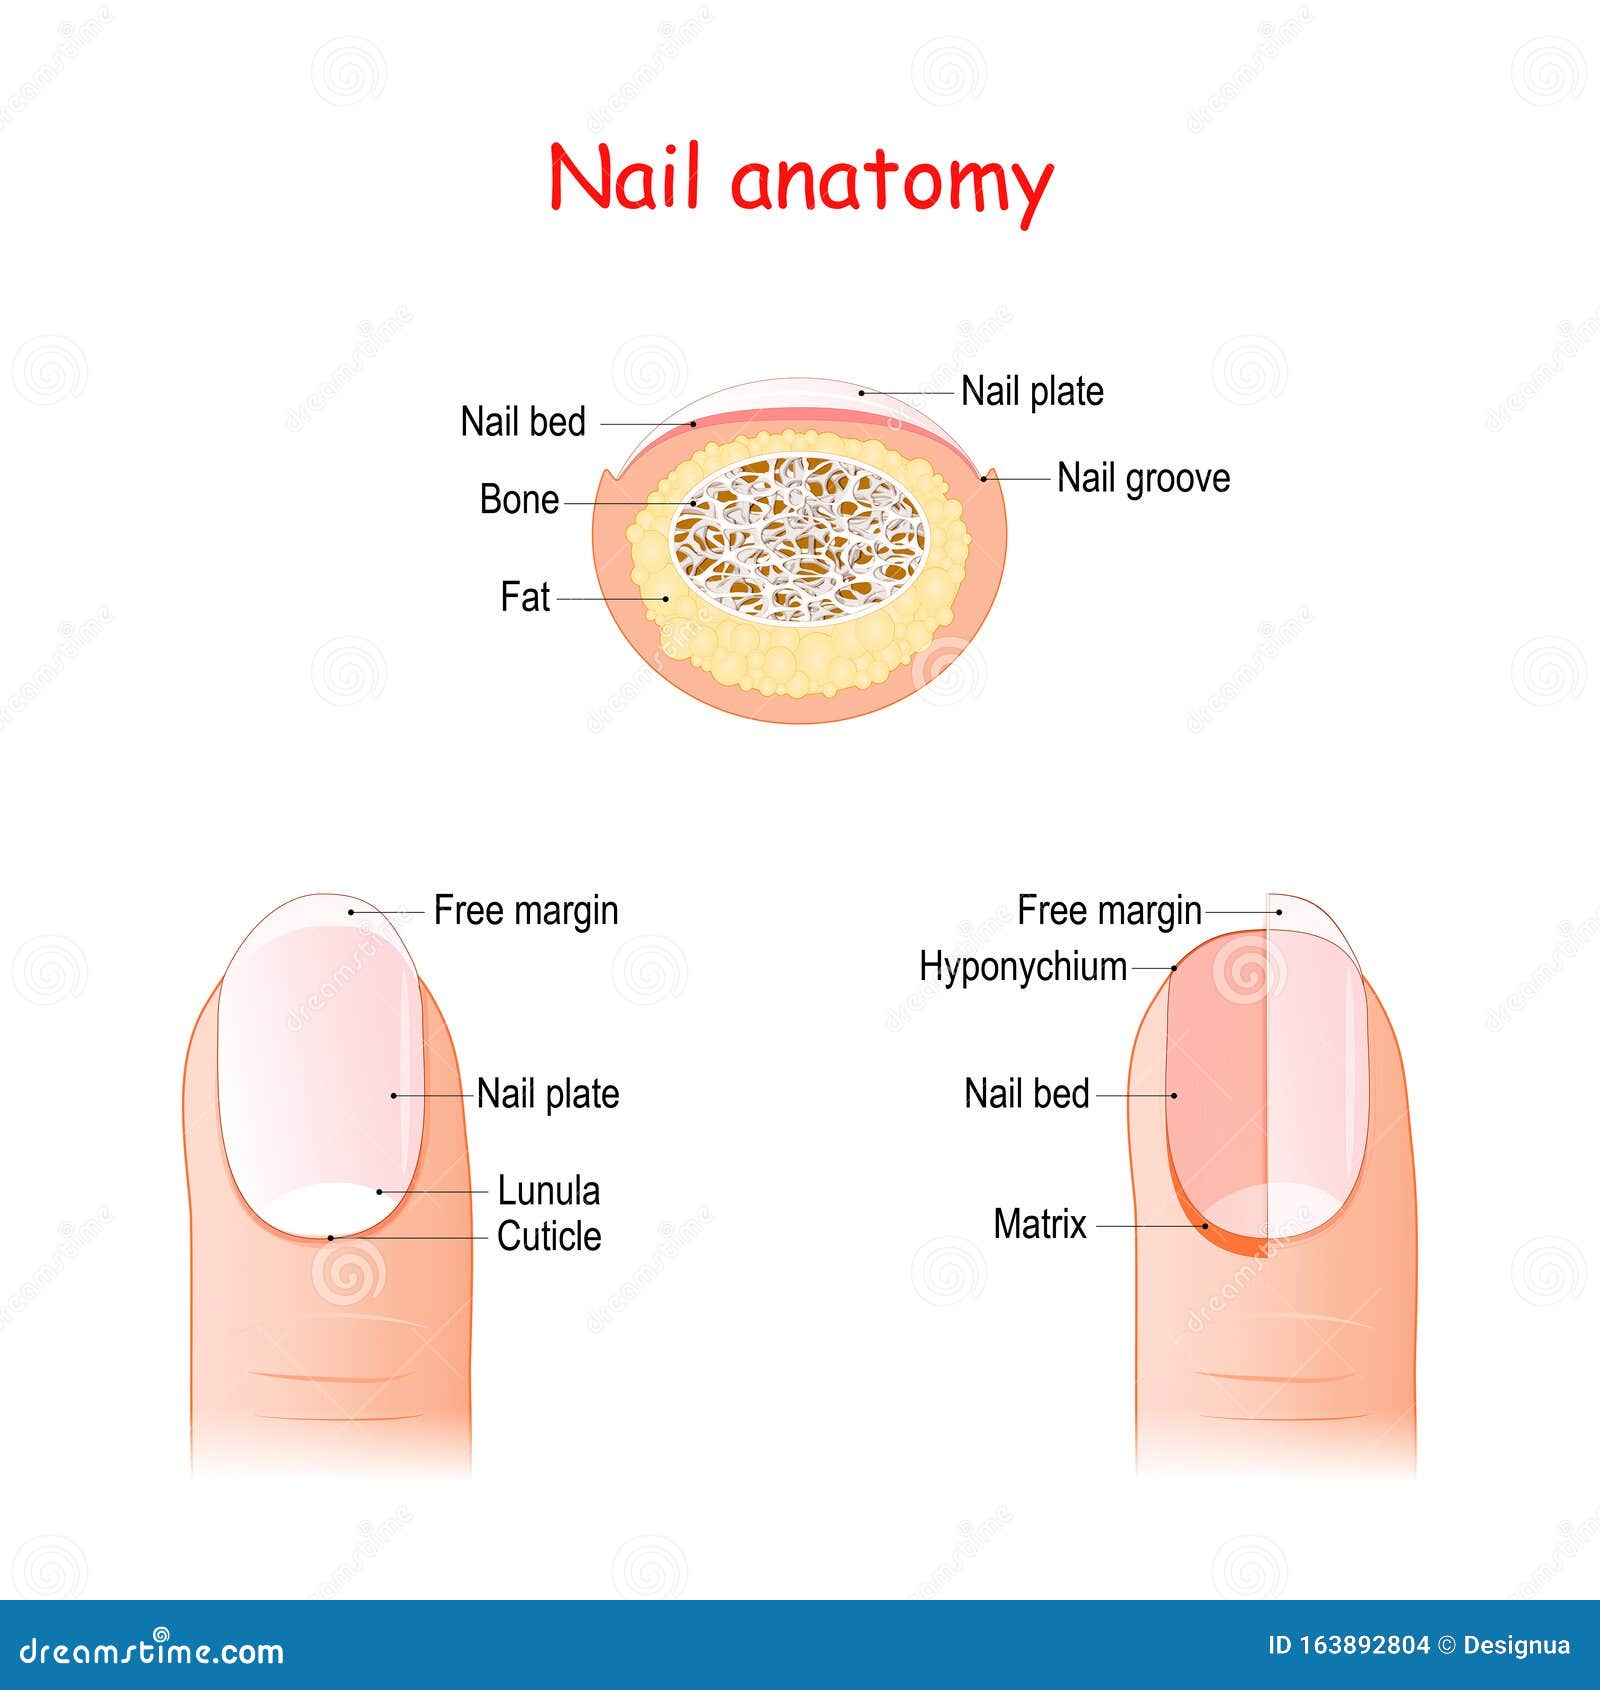 Chapter 9: Nail Growth and Structure